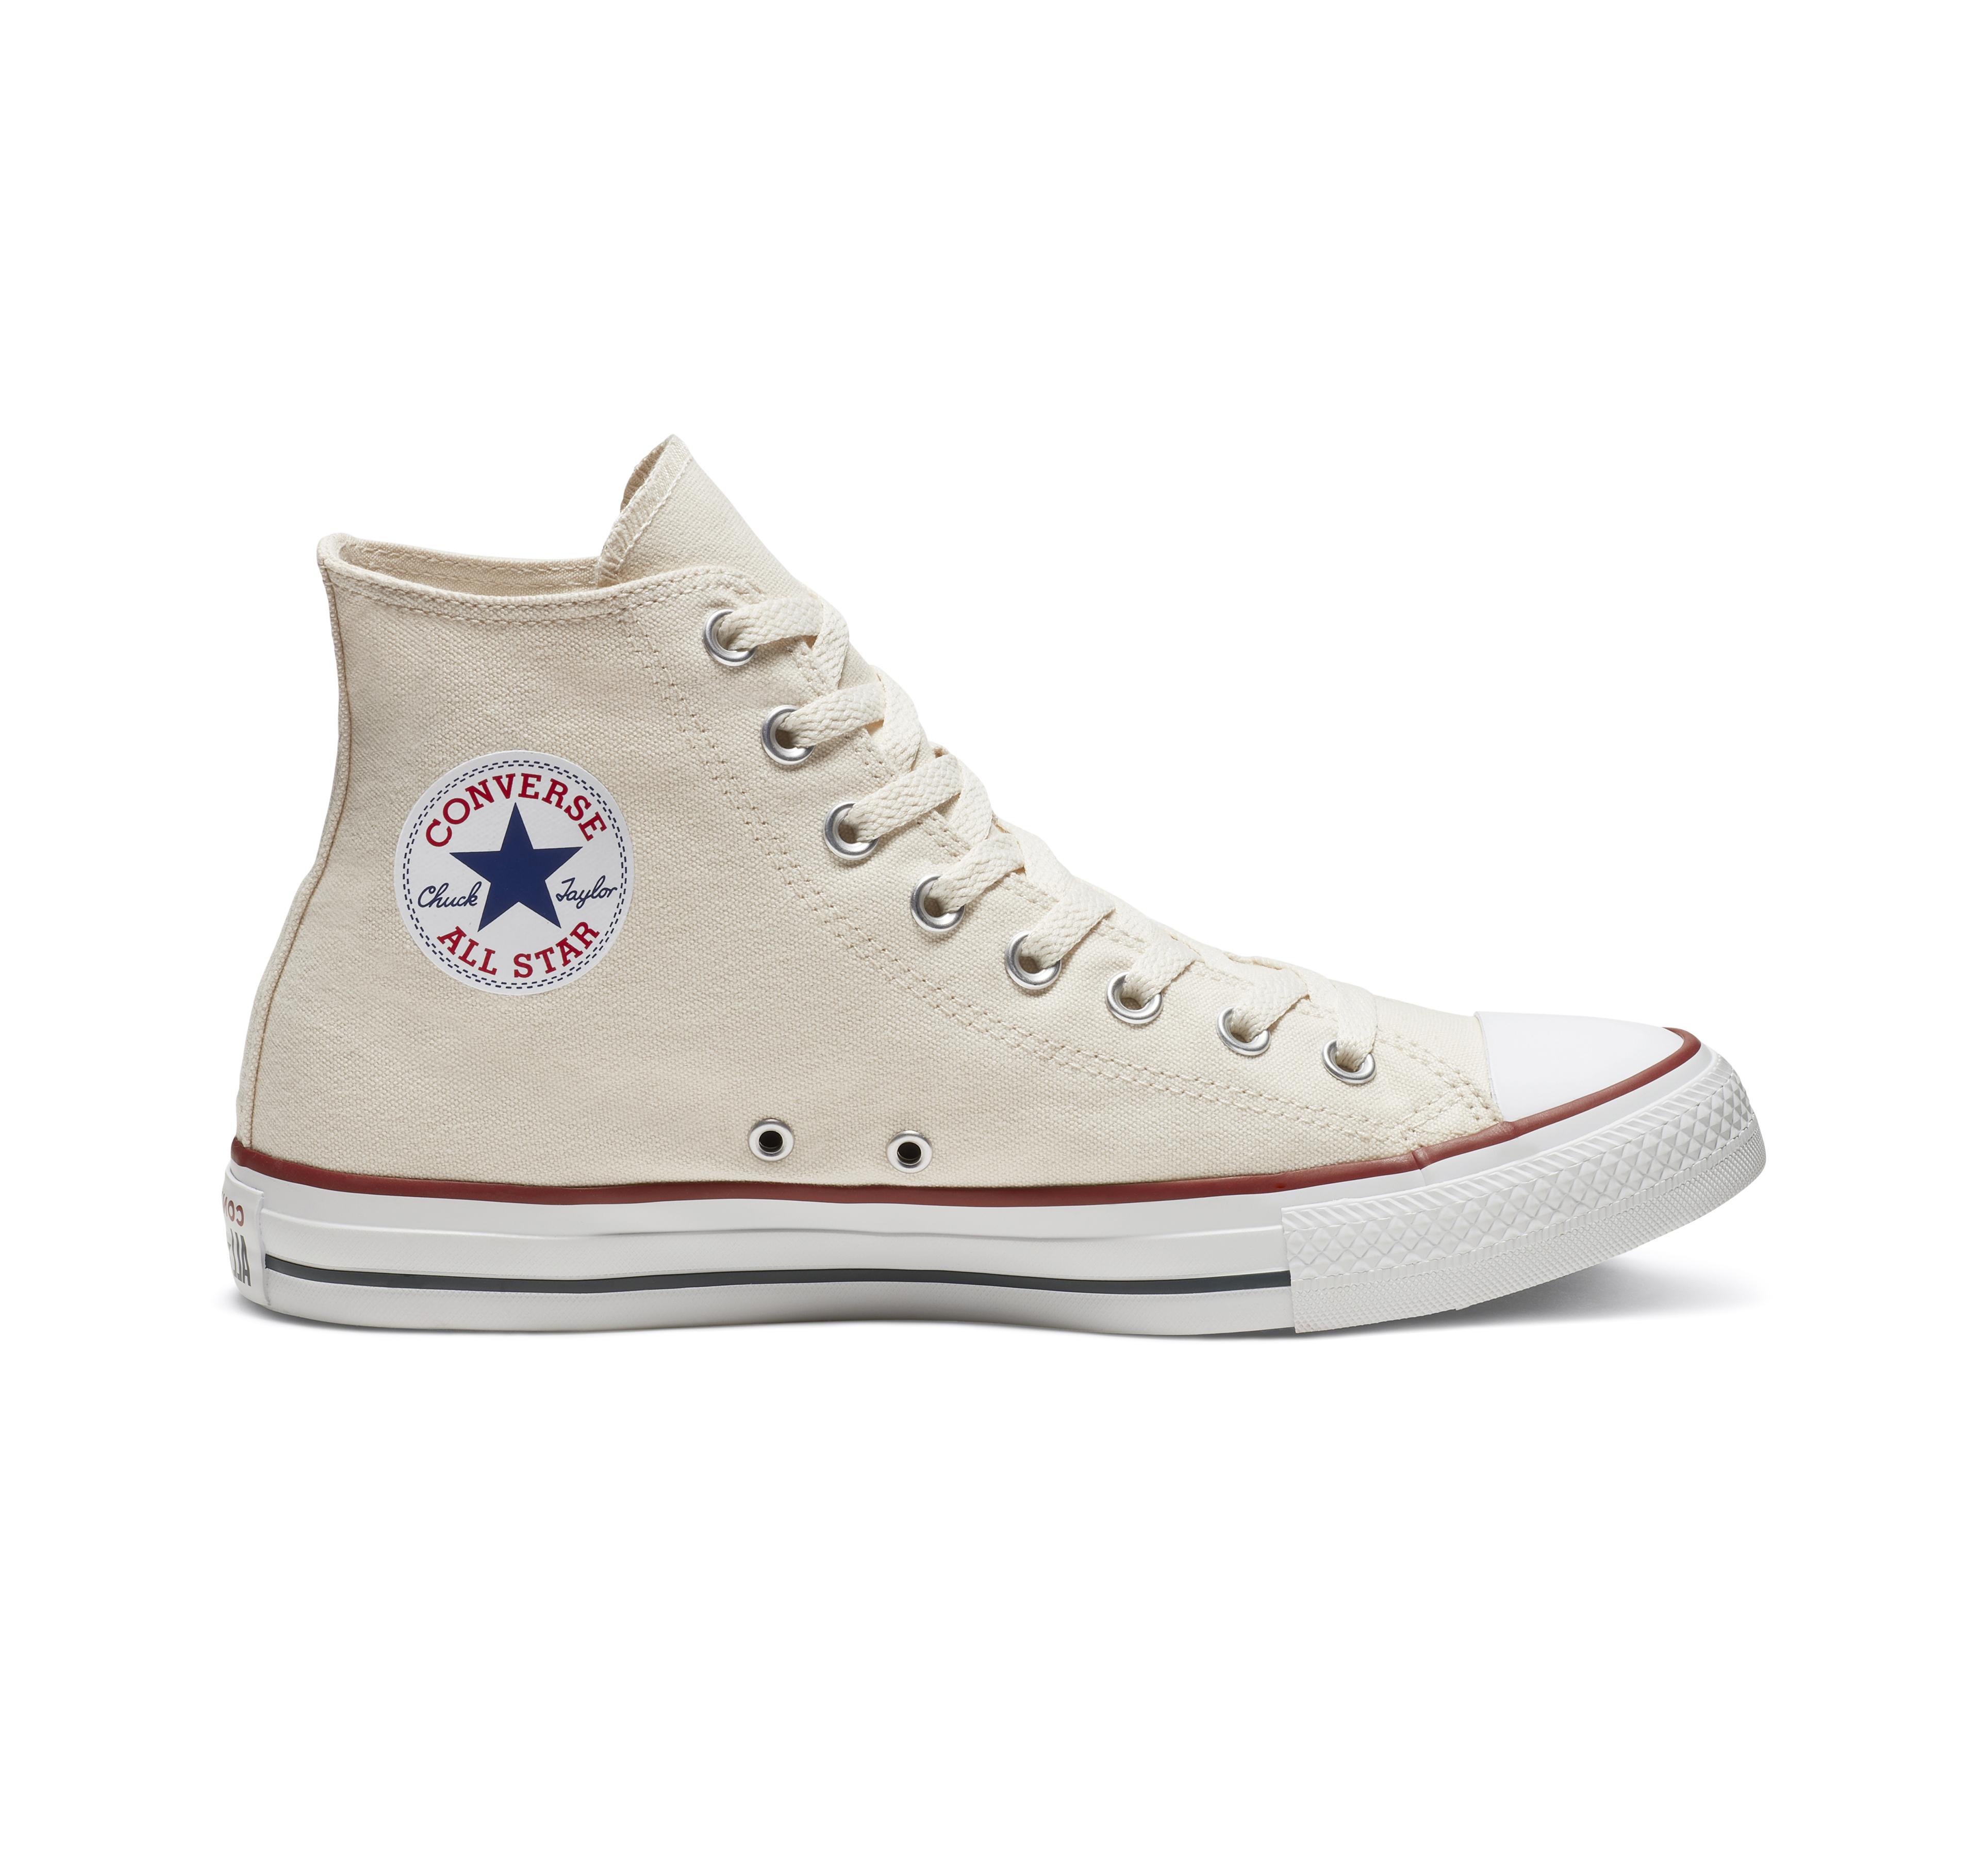 Converse Chuck Taylor All Star High Top in White for Men - Lyst